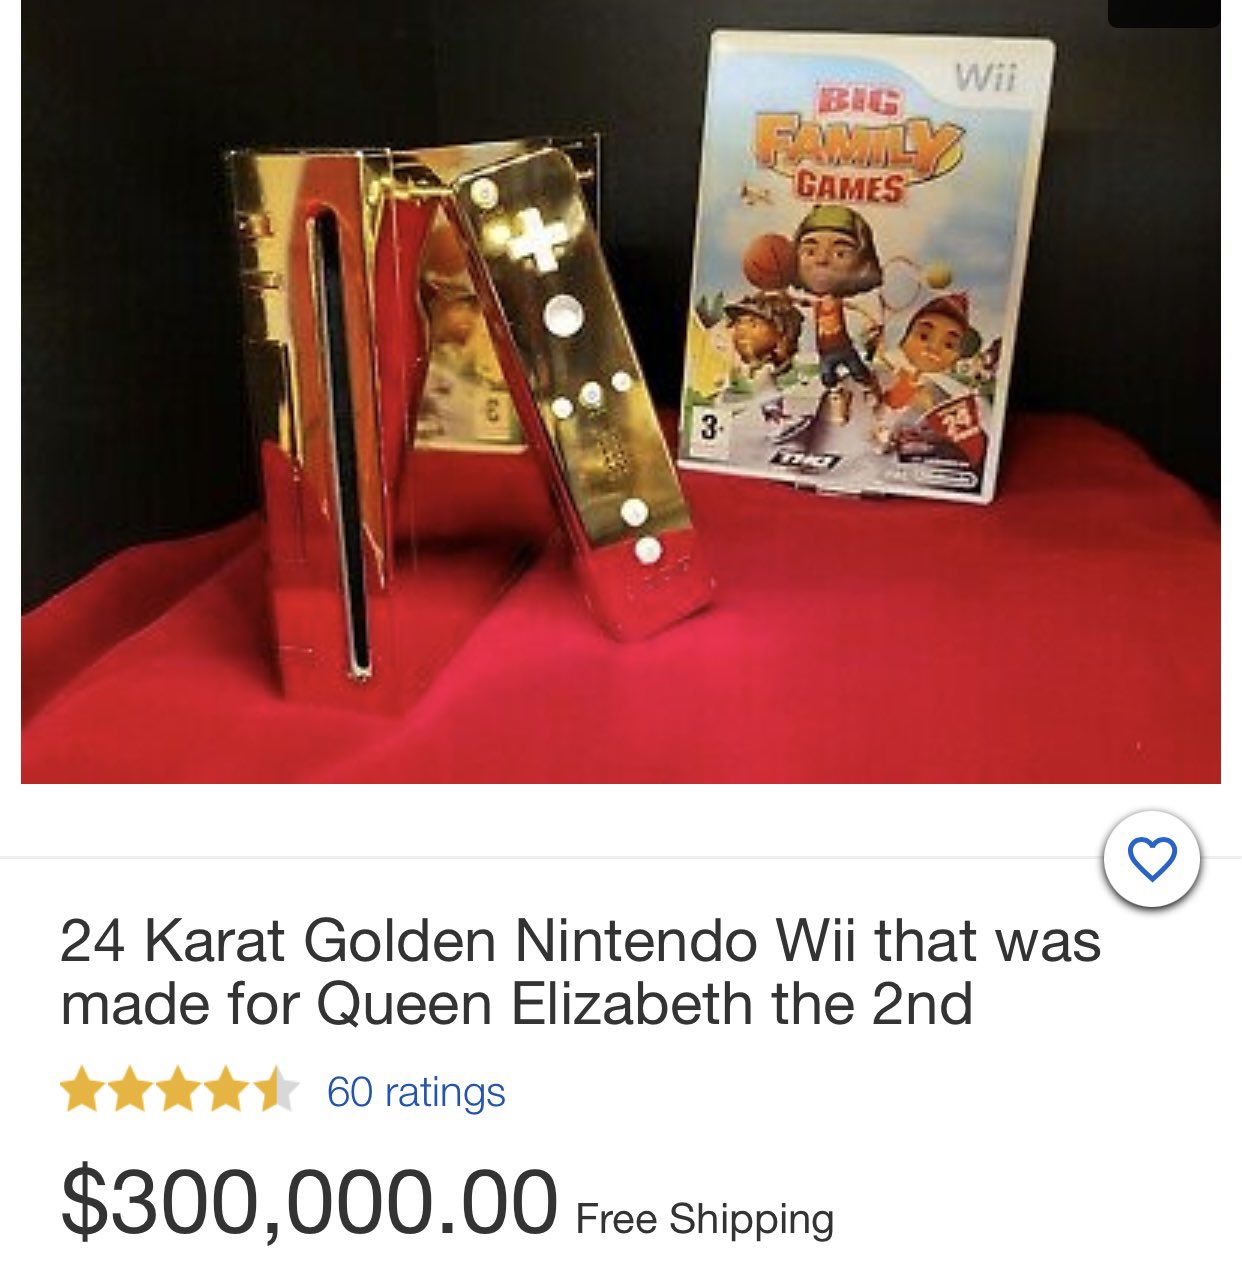 Chemie scheidsrechter kleding Leonhart on Twitter: "Your majesty I present to you a golden Nintendo Wii  and... Big Family Games. https://t.co/8rBih0x0UV" / Twitter